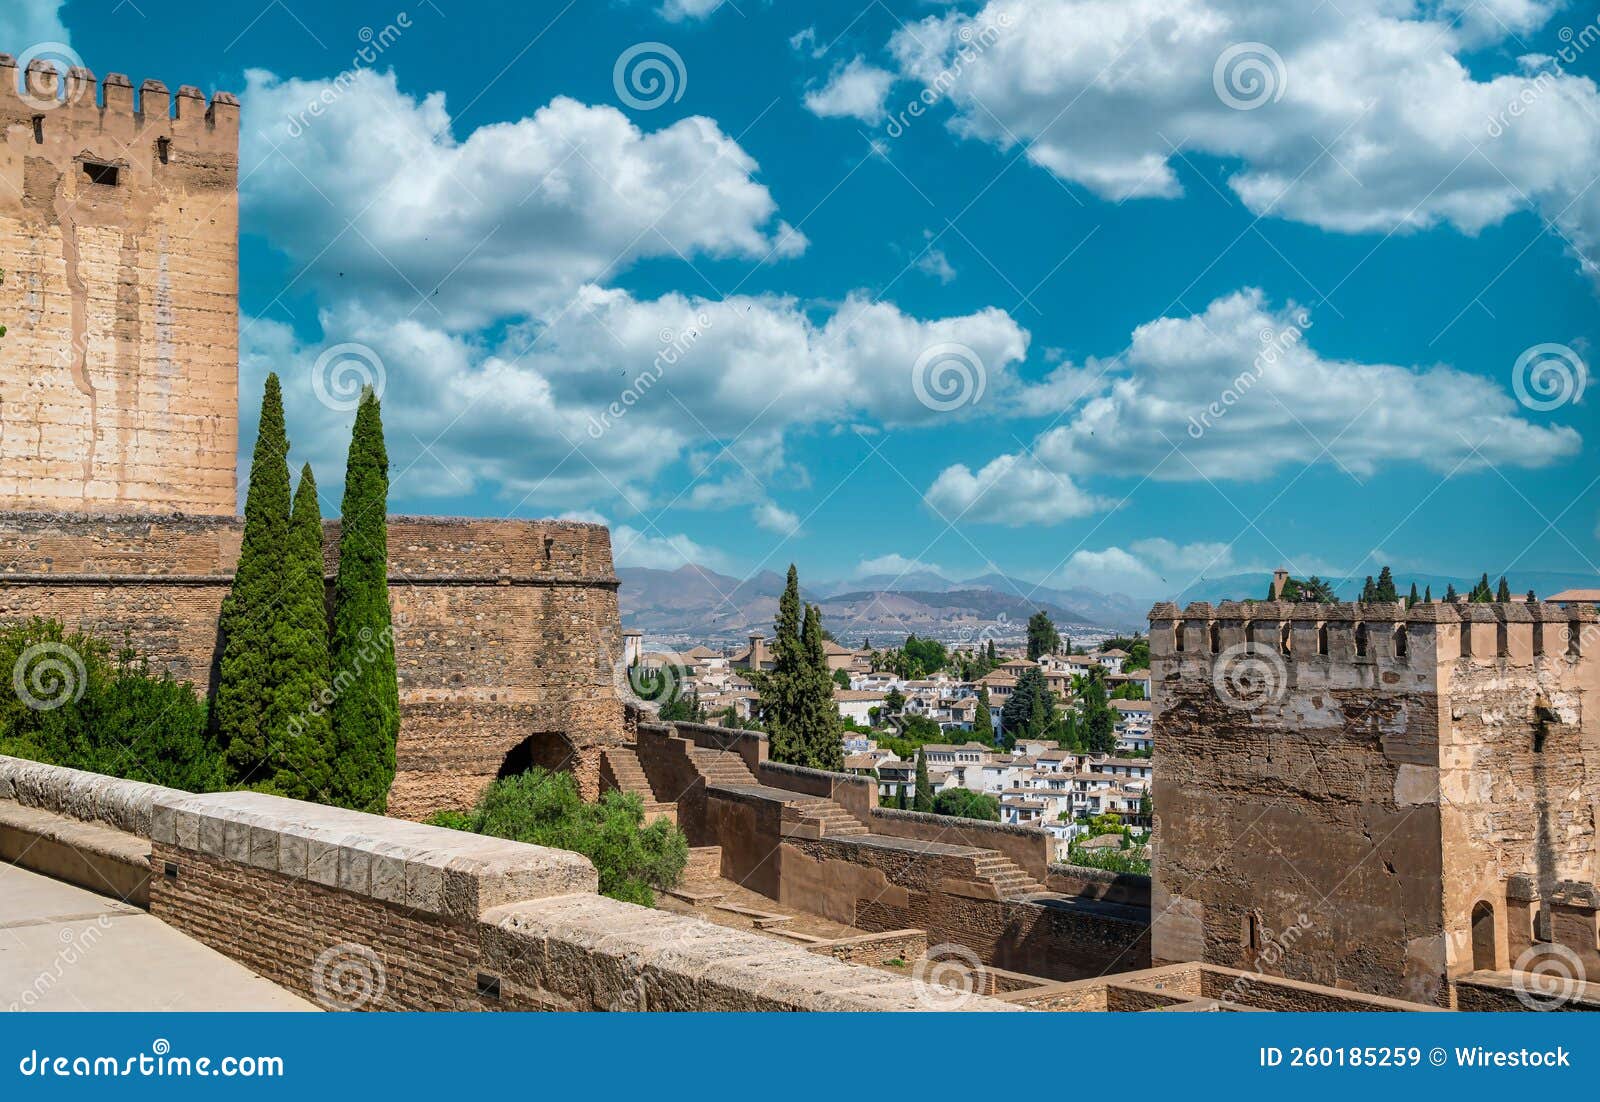 fortificaciÃÆÃÂ³n de la alcazaba del siglo xiii durante el reinado